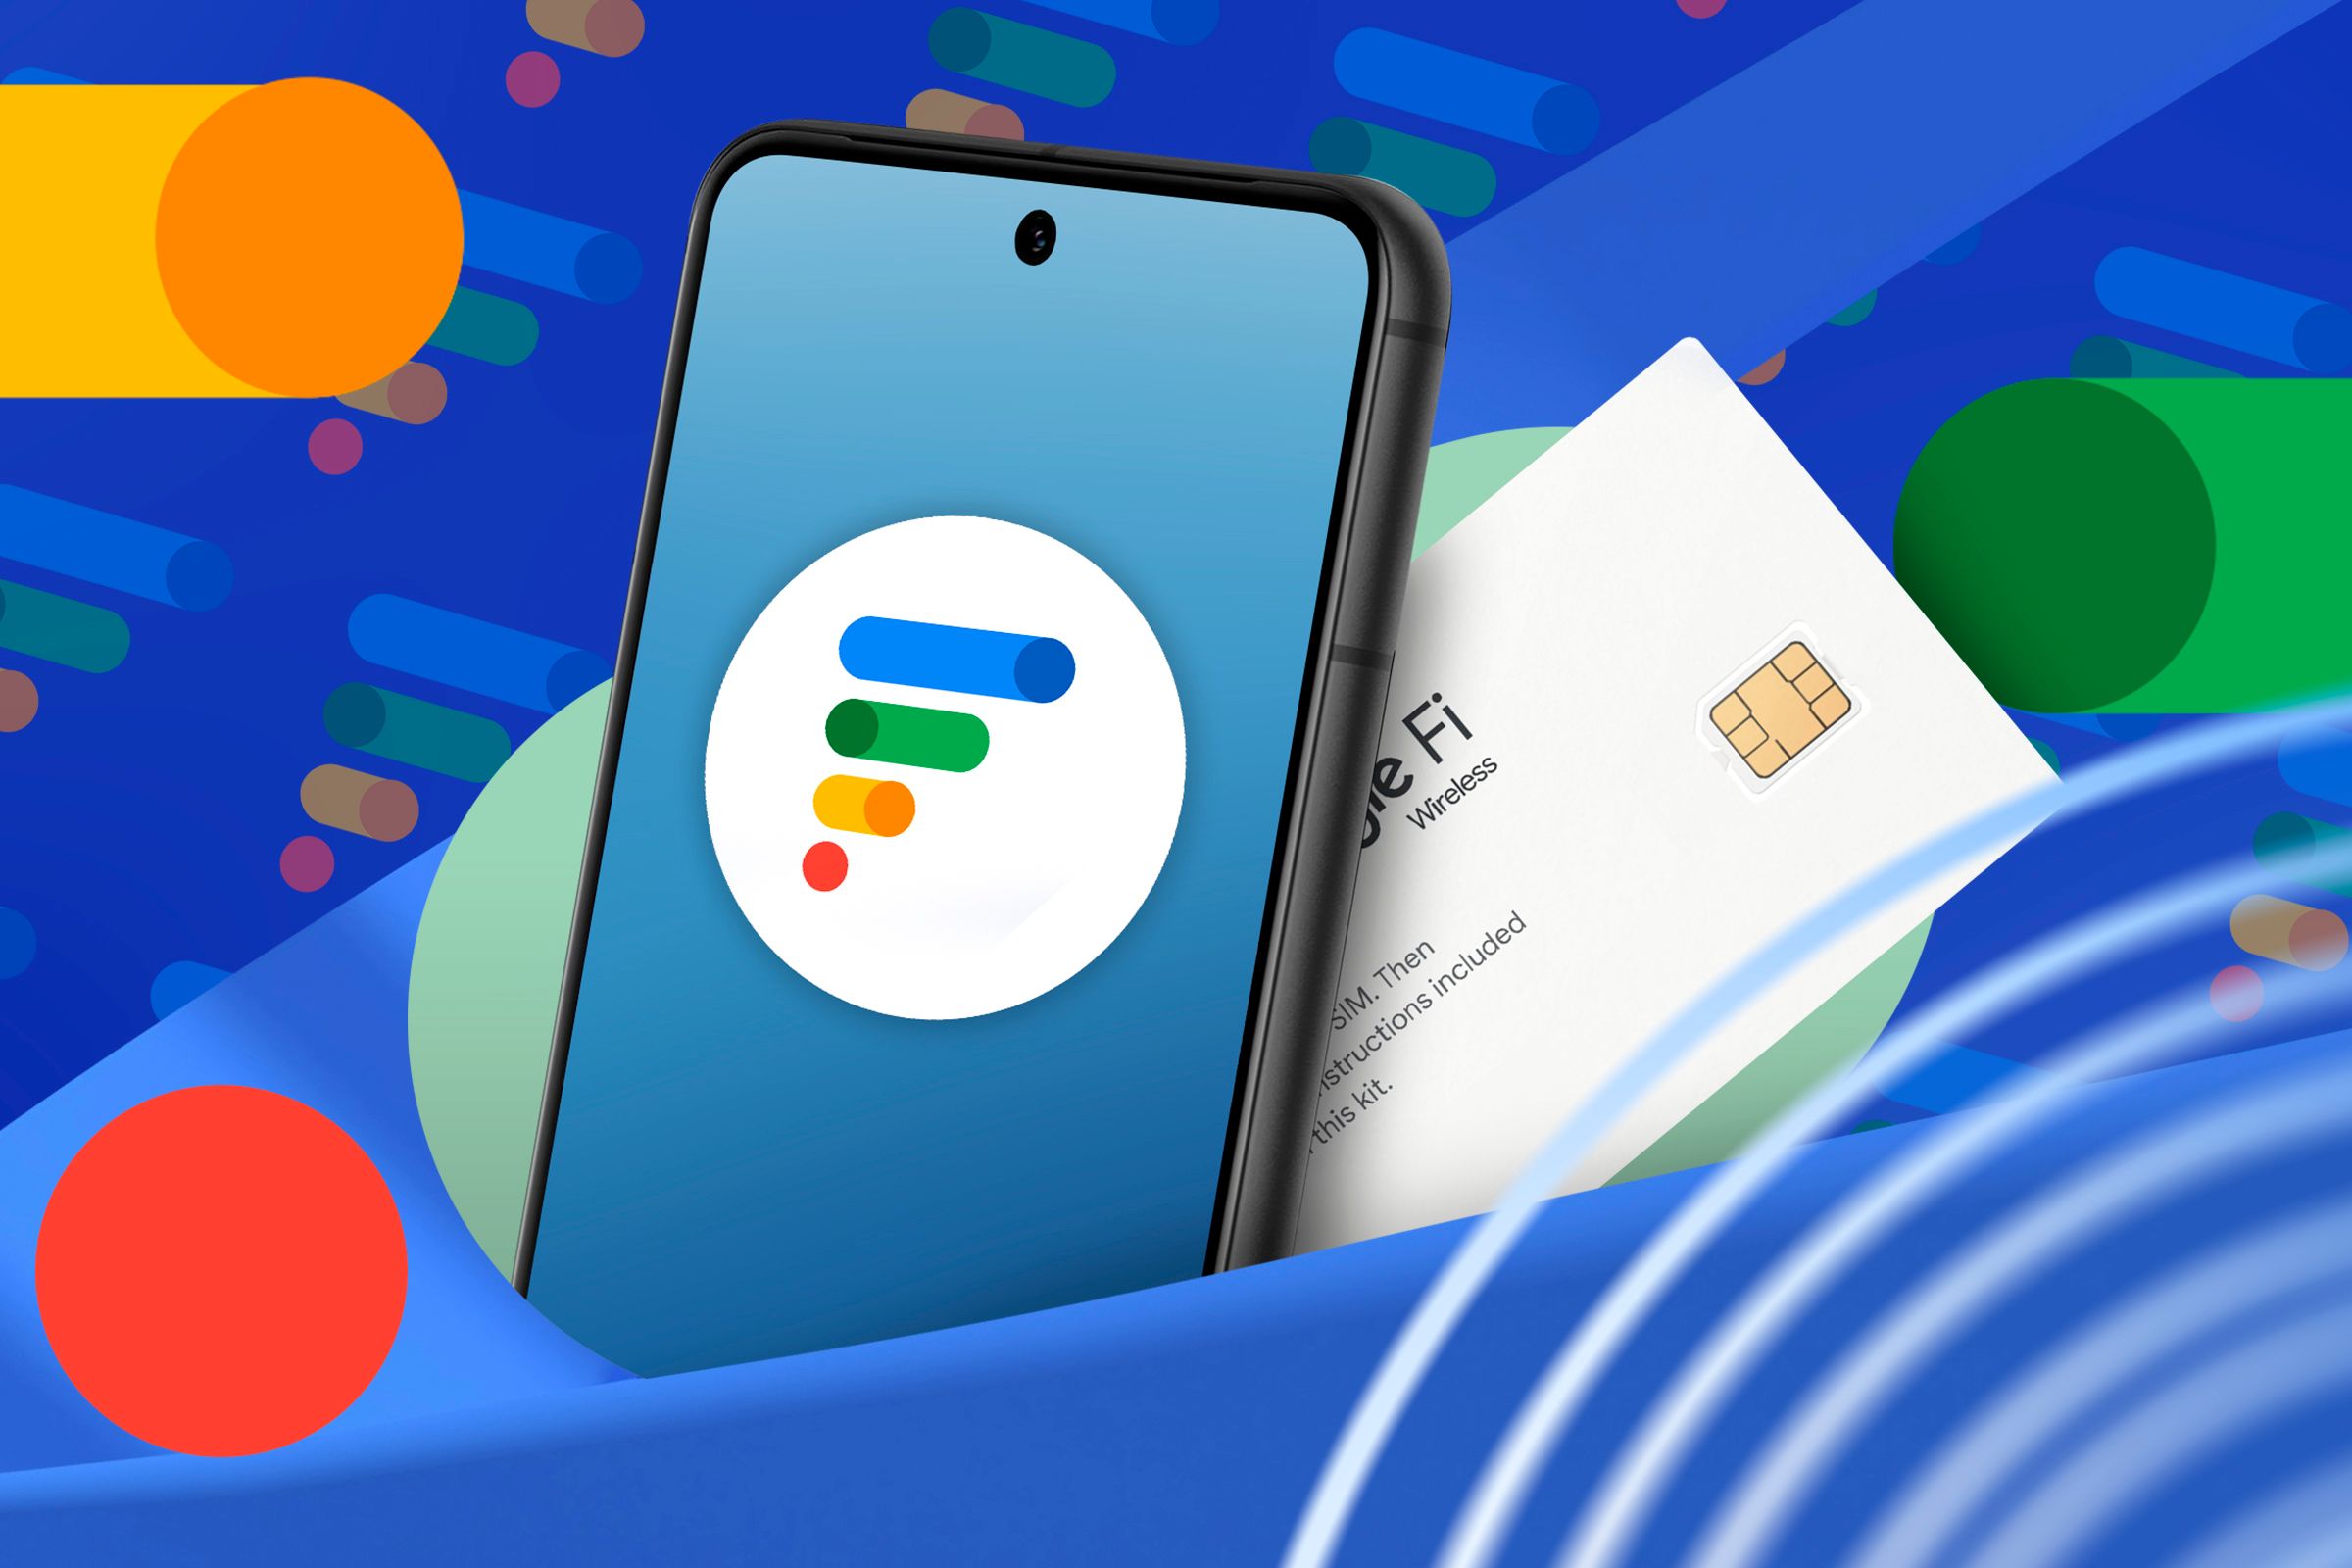 What is Google Fi and how is it different from other carriers?